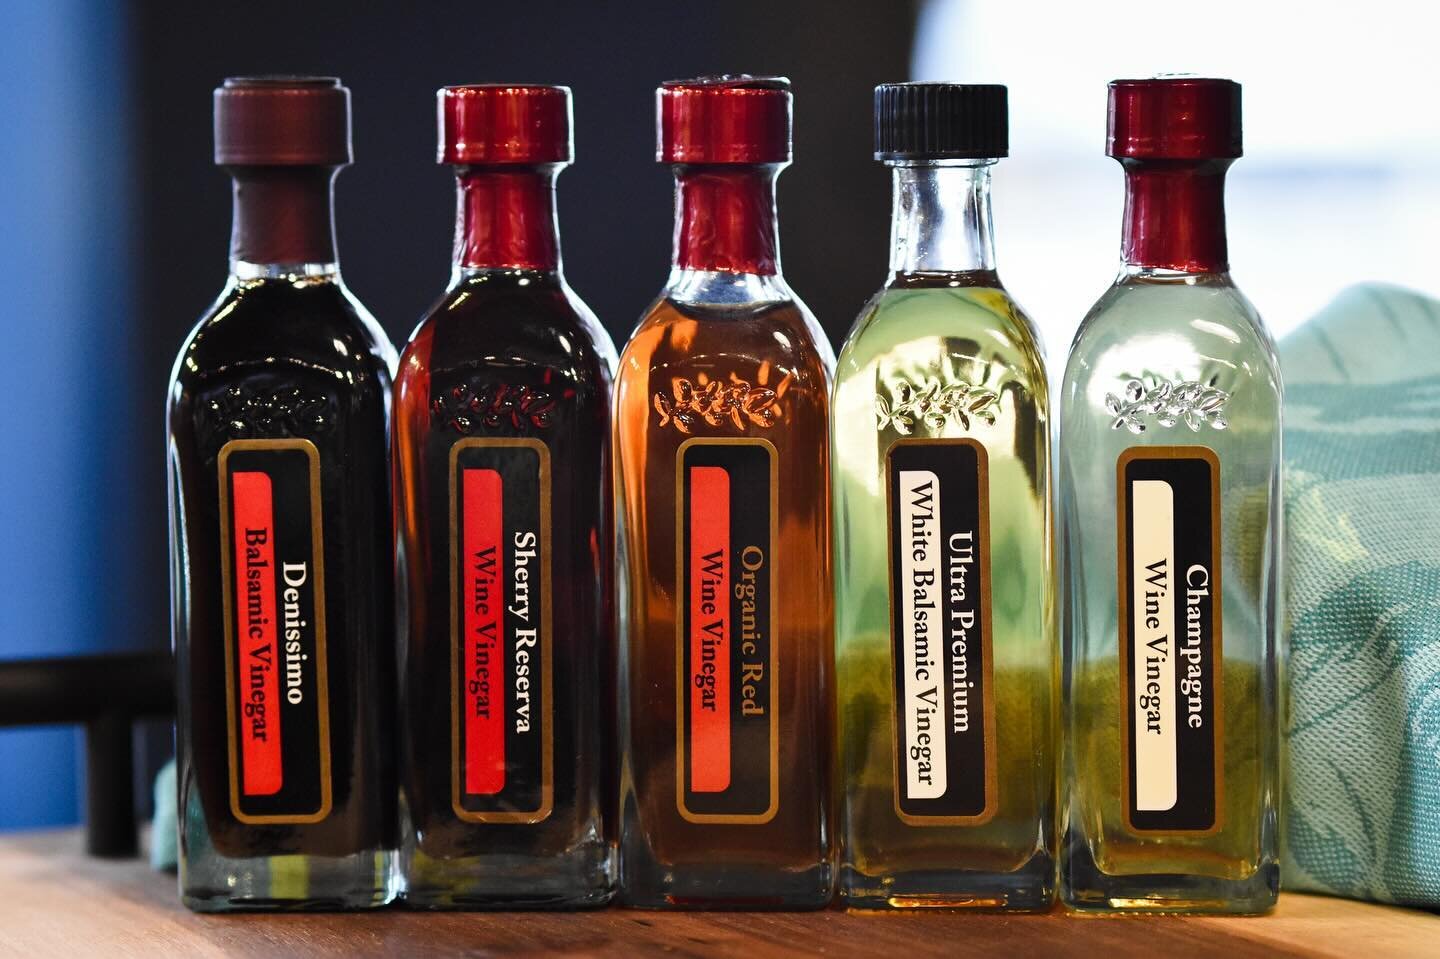 Have you tried any of our specialty vinegars? In this lineup of decadent flavours we have Denissimo, Sherry Reserve, Organic Red Wine, Ultra Premium White balsamic, and Champagne wine vinegar! These are fantastic when you need just a drop of luxury ?